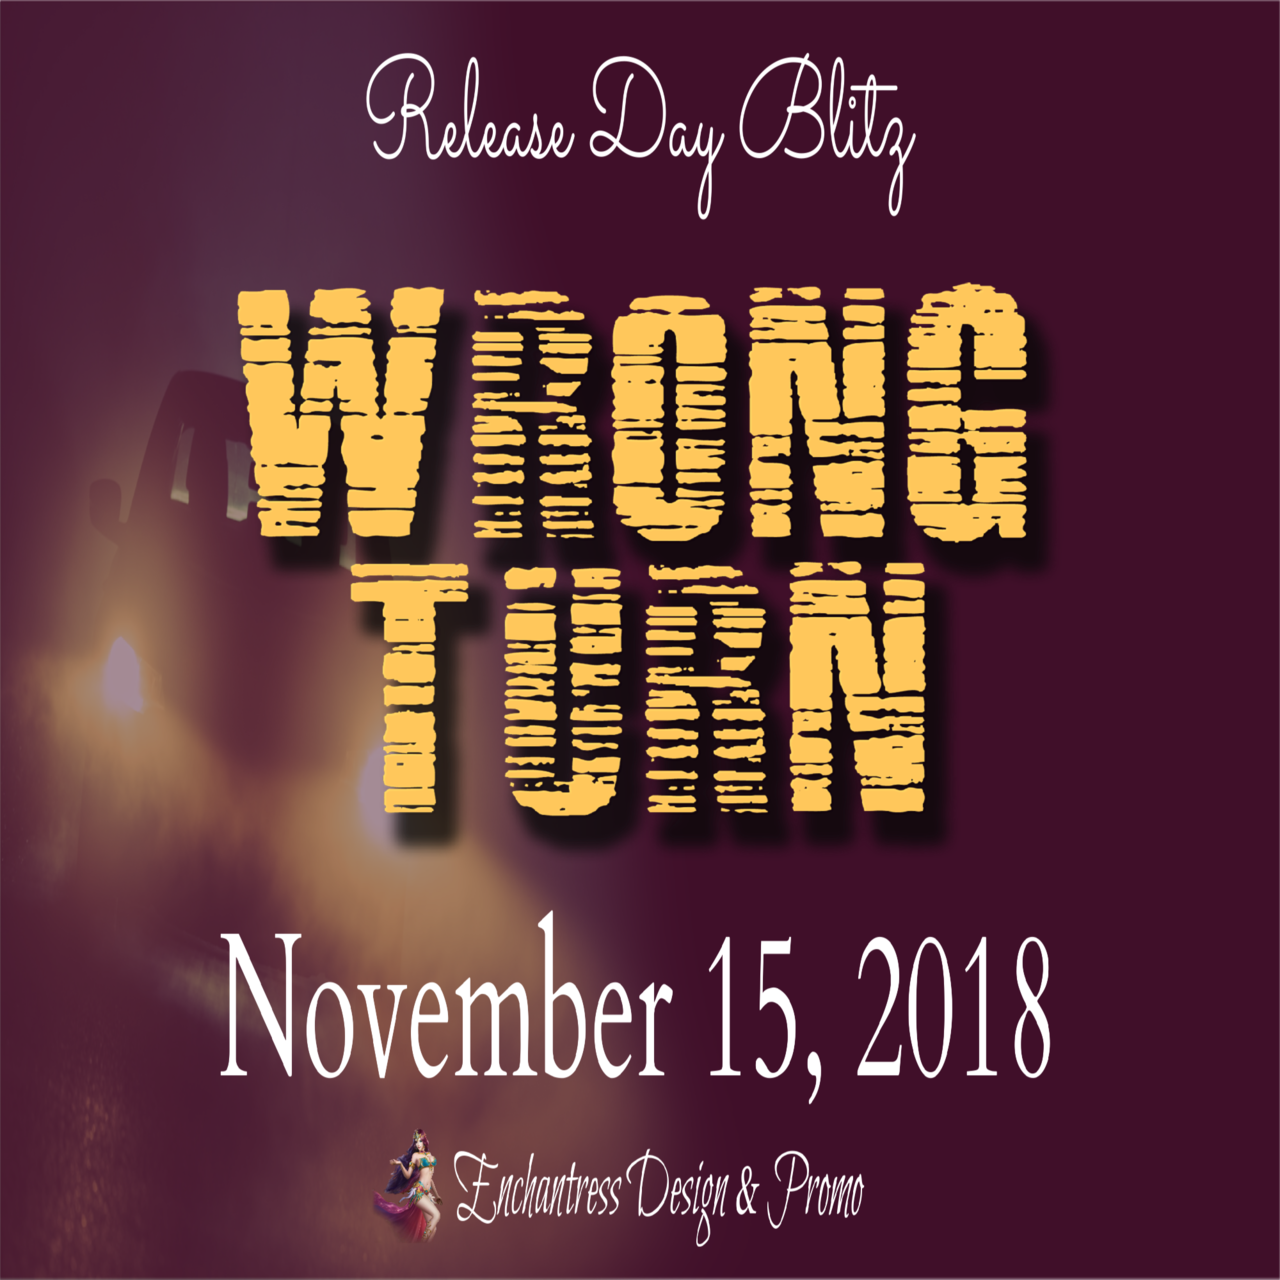 Join the Release Day Blitz for WRONG TURN An Anthology.
Sign Up Form: https://goo.gl/forms/1Ld4U9vwtdv8gA1h2